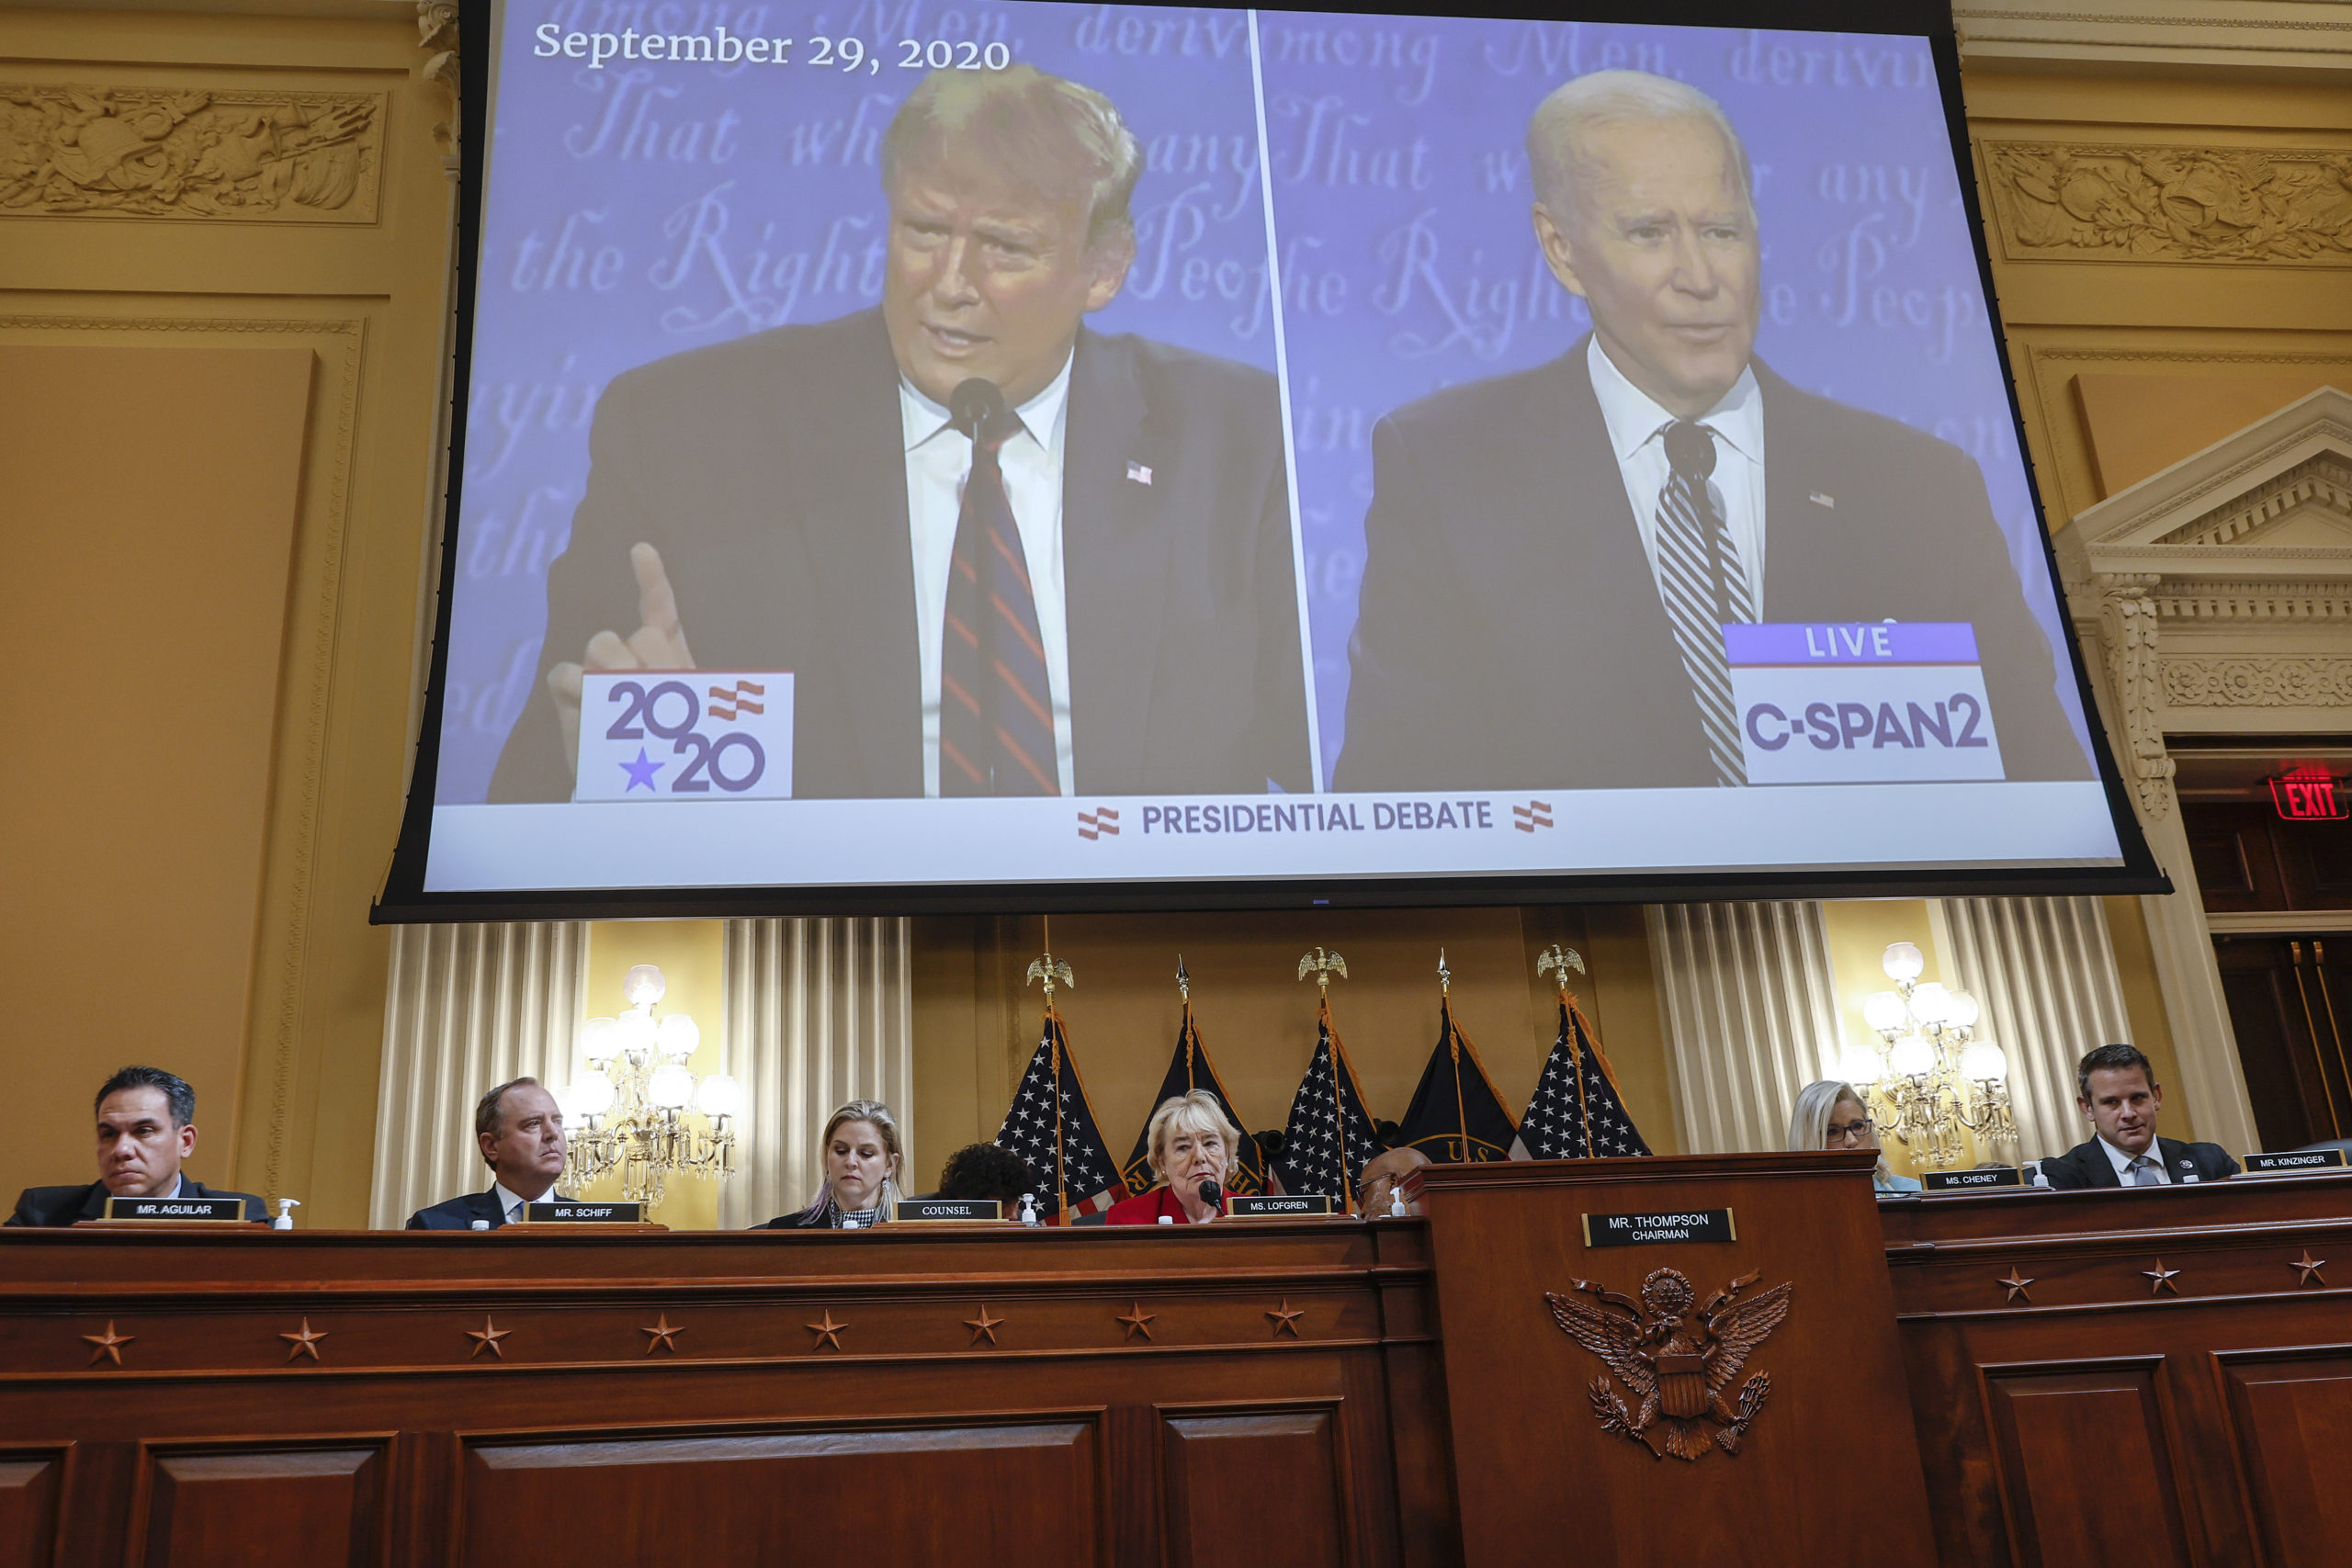 Video of former President Donald Trump and President Joe Biden is played during a hearing by the Select Committee to Investigate the January 6th Attack on the U.S. Capitol in the Cannon House Office Building on June 13, 2022 in Washington, DC. The bipartisan committee, which has been gathering evidence for almost a year related to the January 6 attack at the U.S. Capitol, will present its findings in a series of televised hearings. On January 6, 2021, supporters of former President Donald Trump attacked the U.S. Capitol Building during an attempt to disrupt a congressional vote to confirm the electoral college win for President Joe Biden. (Photo by Chip Somodevilla/Getty Images)